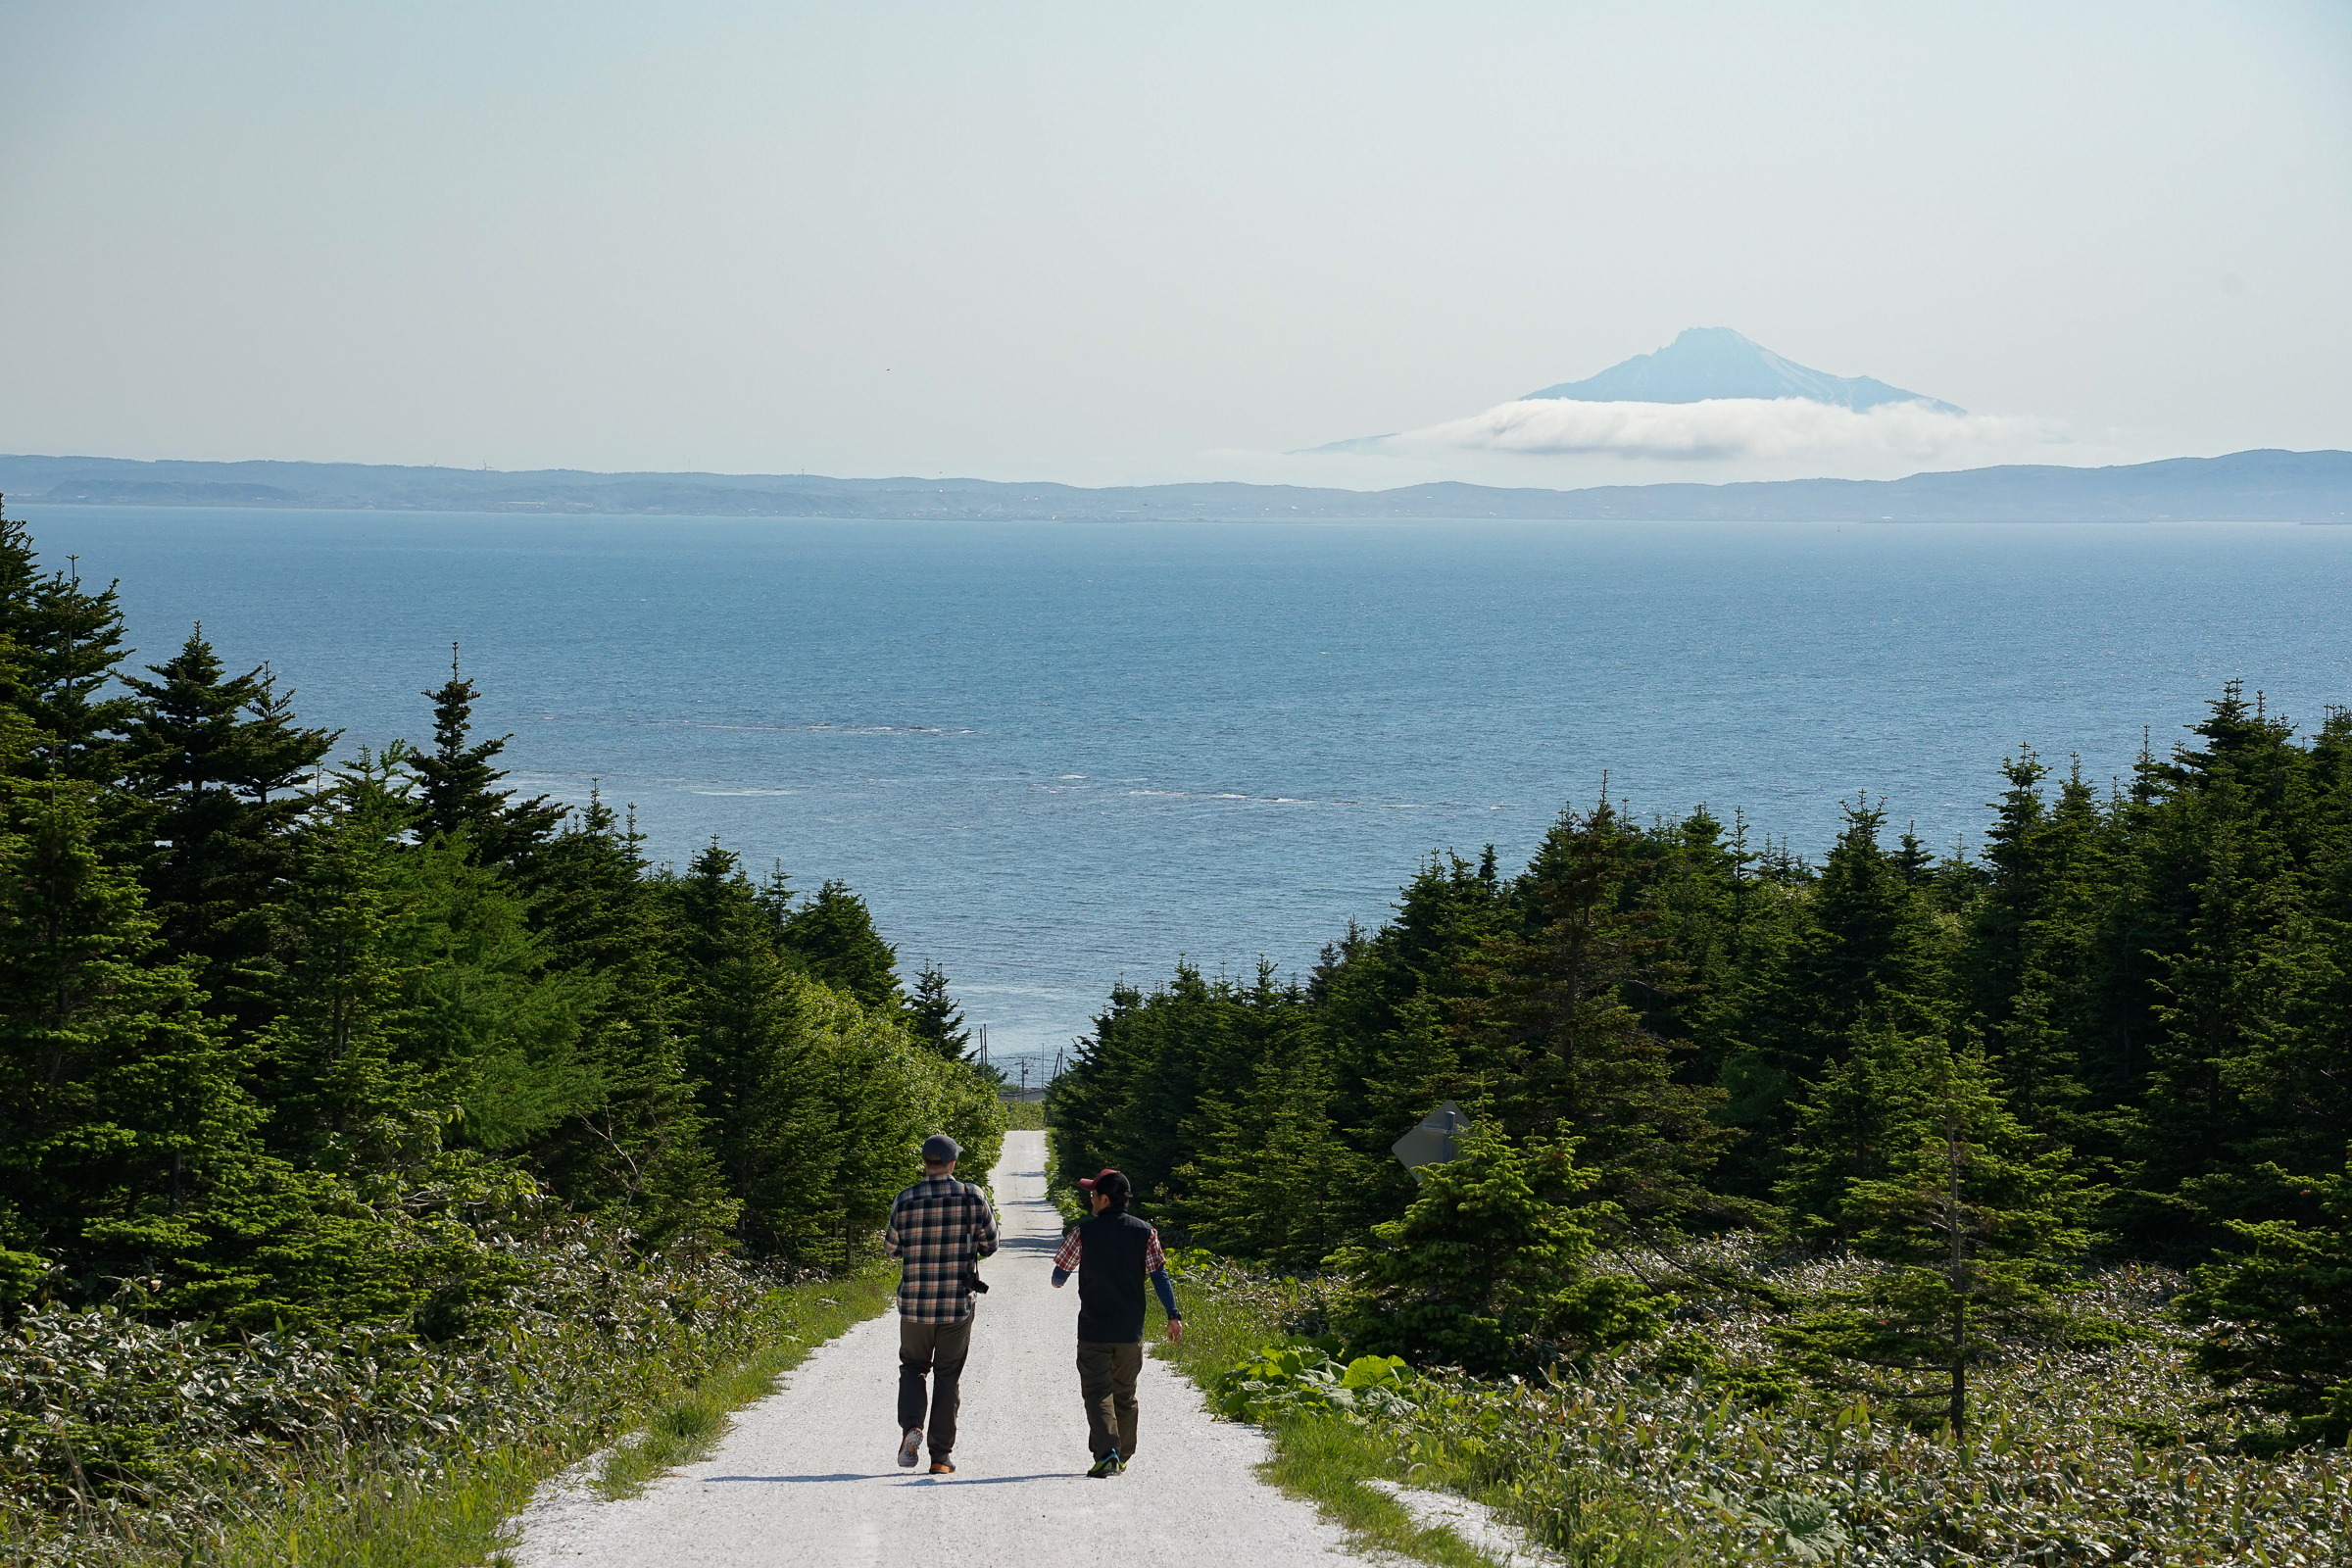 Two men walk down a white path leading to the sea, with Mt. Rishiri wreathed in cloud in the distance.